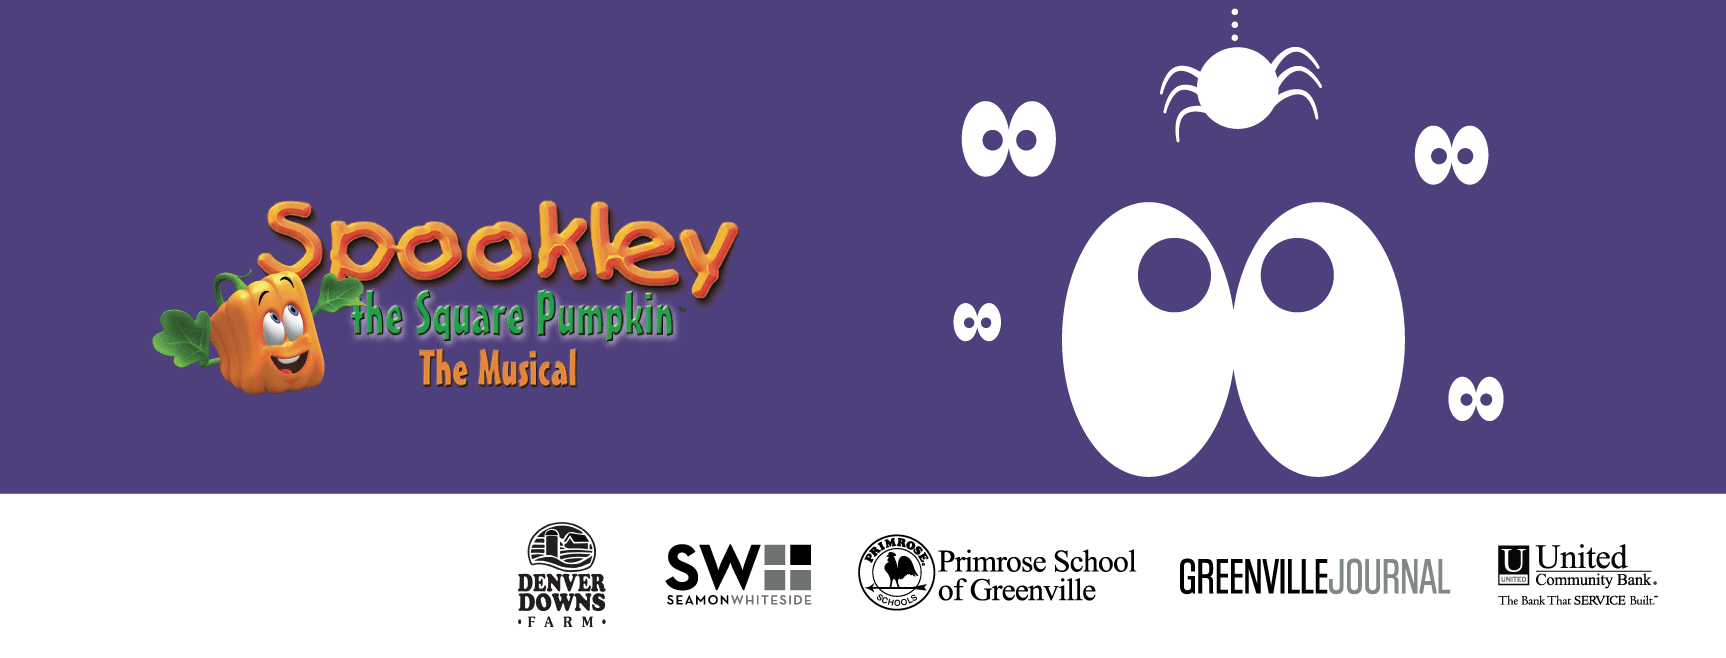 SCCT Template 2021 22 rev 11 - Cast of SPOOKLEY THE SQUARE PUMPKIN: THE MUSICAL to open for Denver Down's Pumpkin Princess Pageant